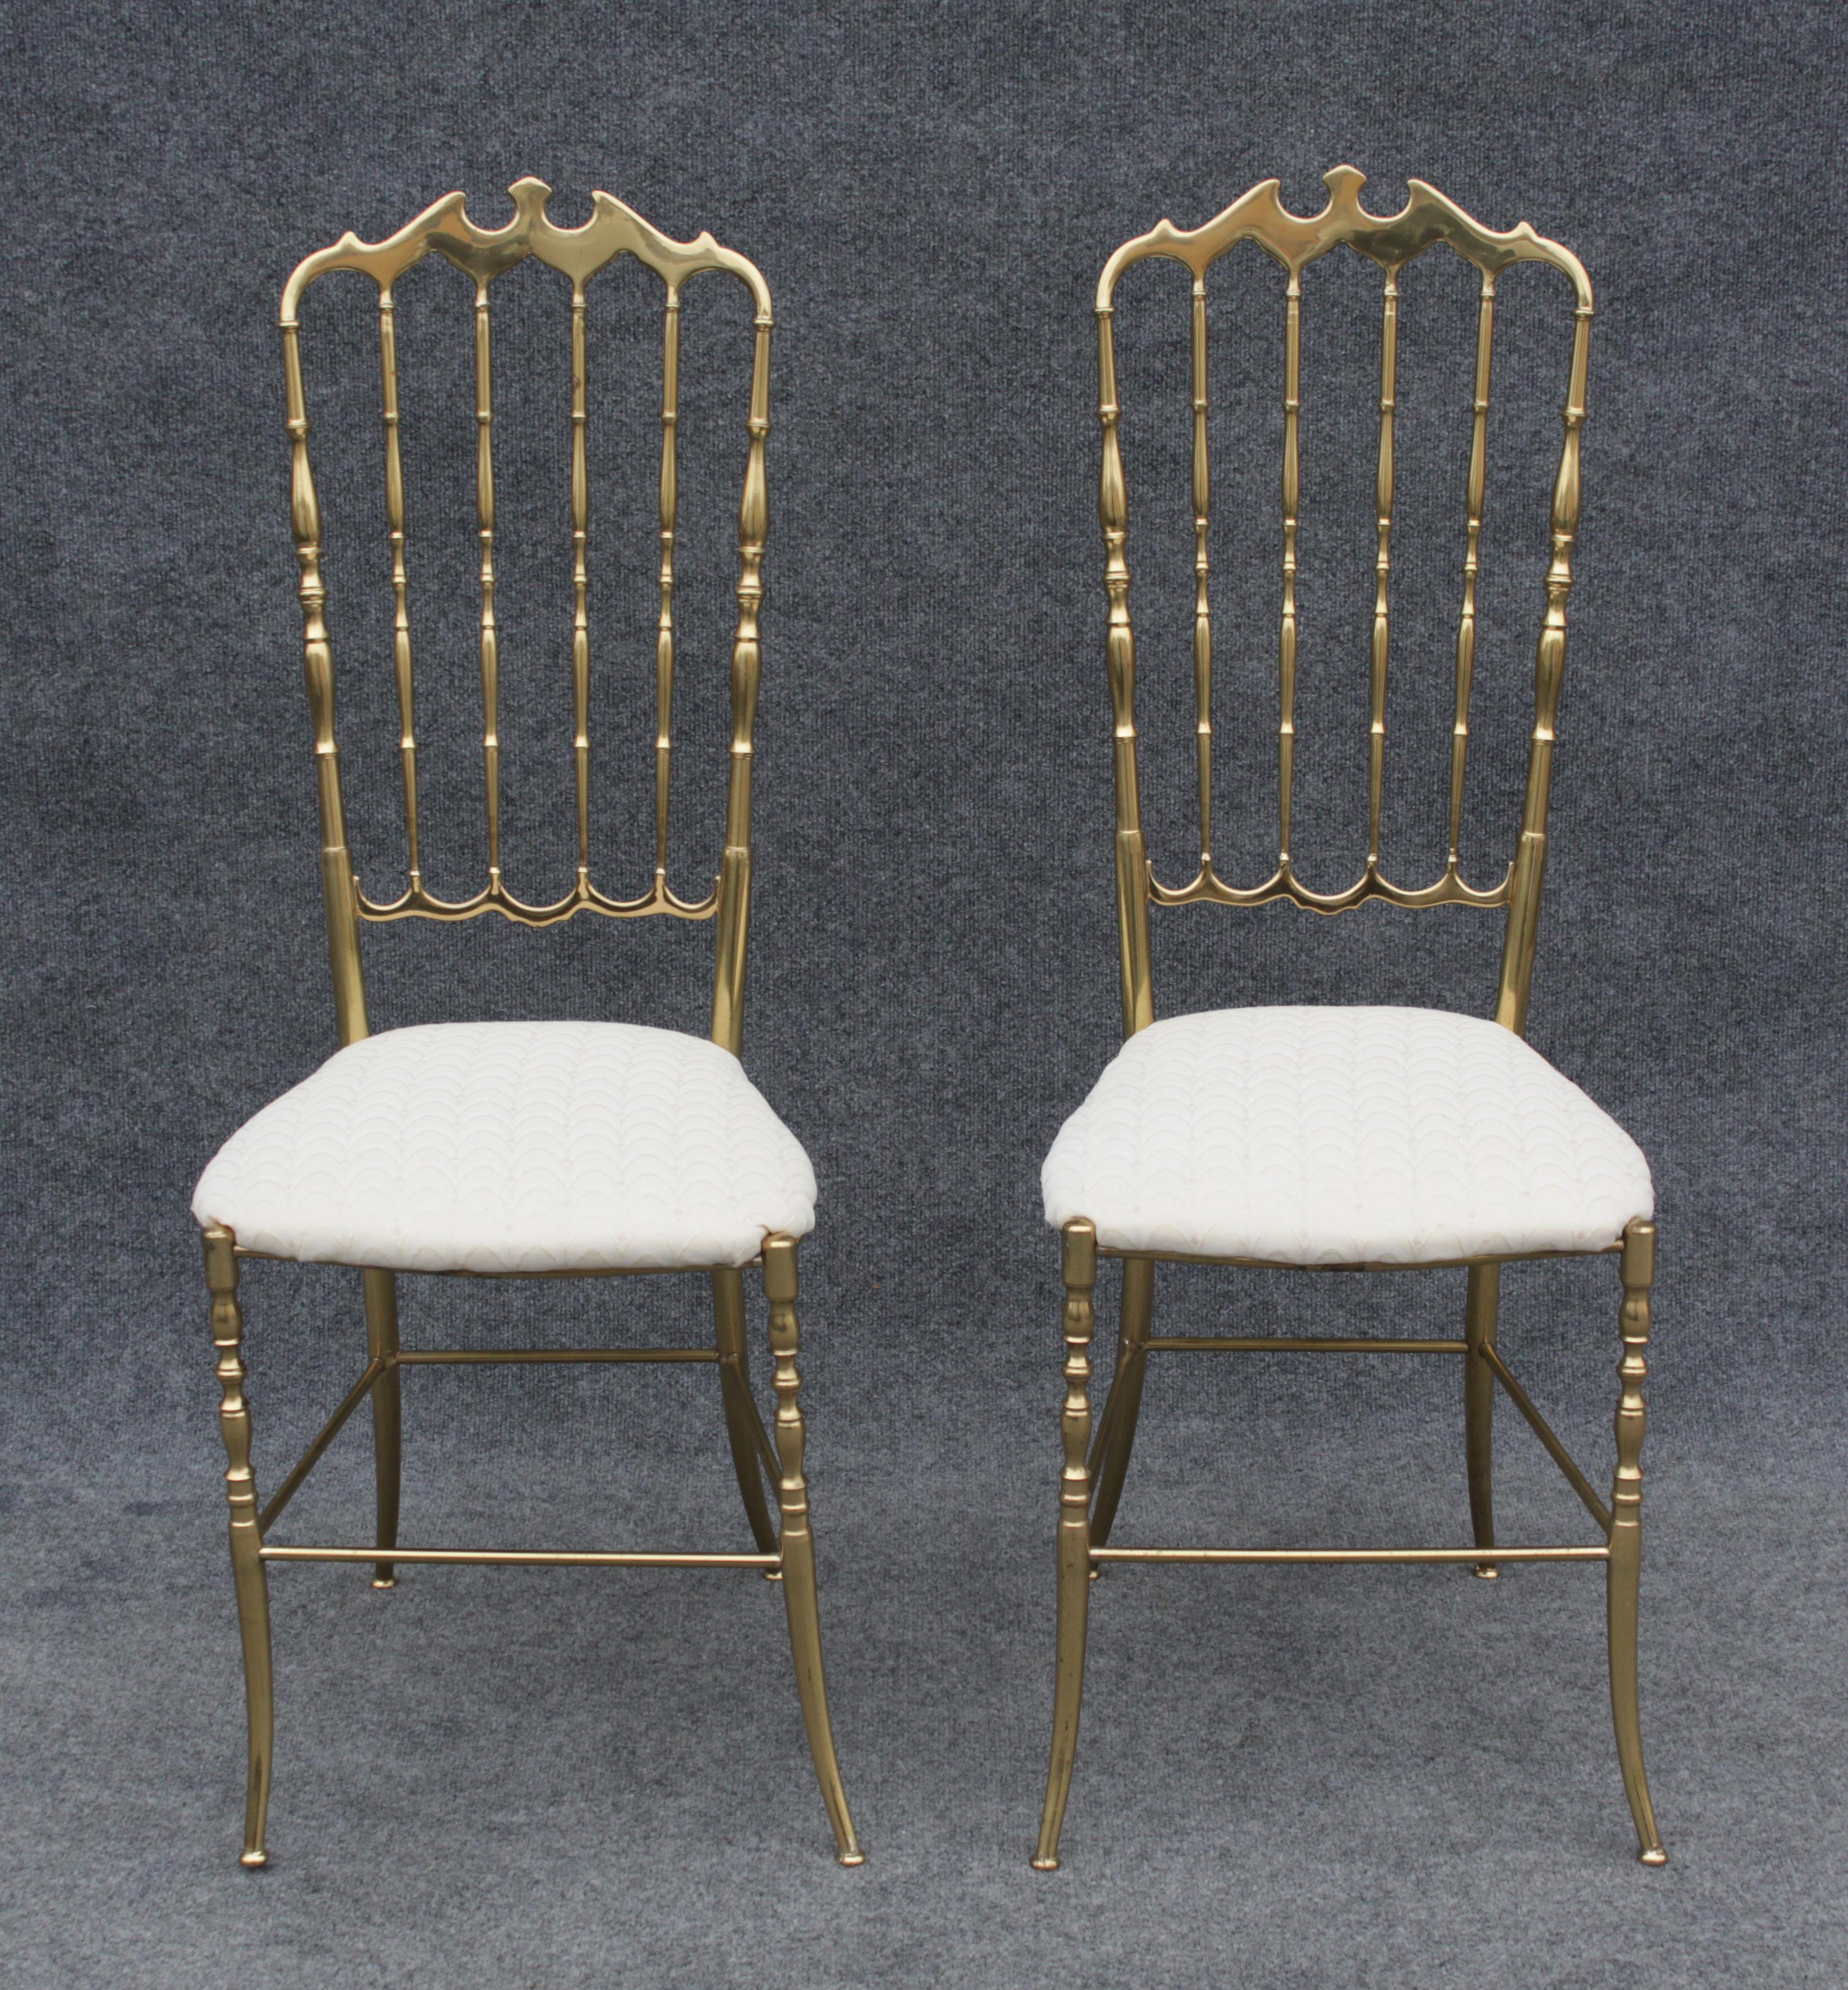 Mid-Century Modern Pair of Solid Brass & White Upholstered Dining or Side Chairs by Chiavari Italy For Sale